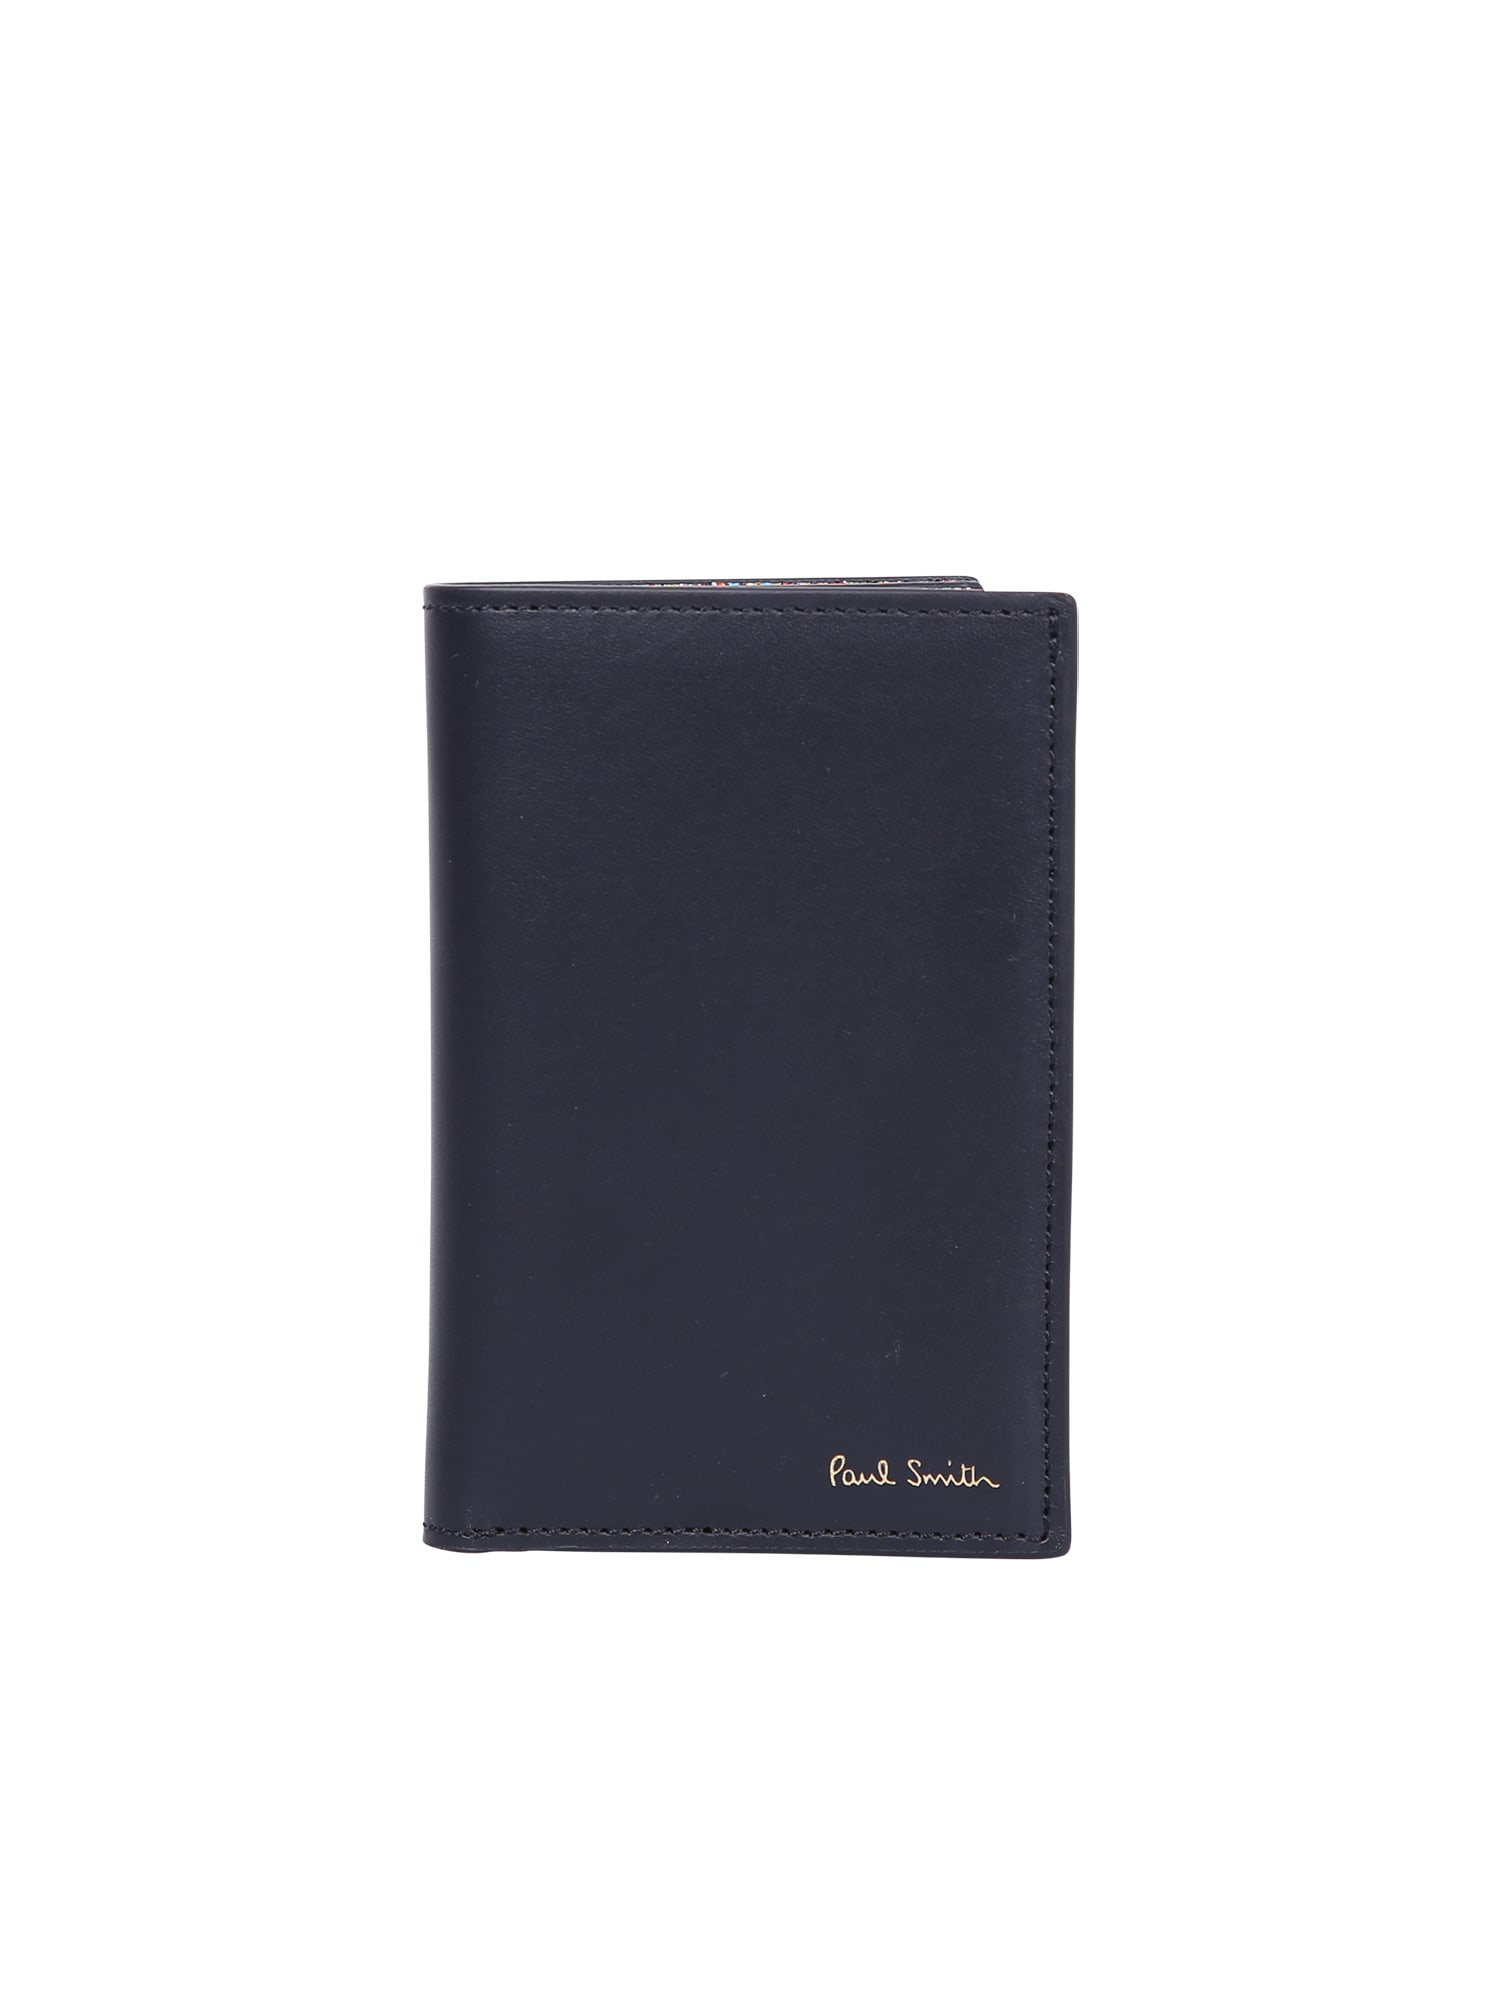 Paul Smith Branded Wallet